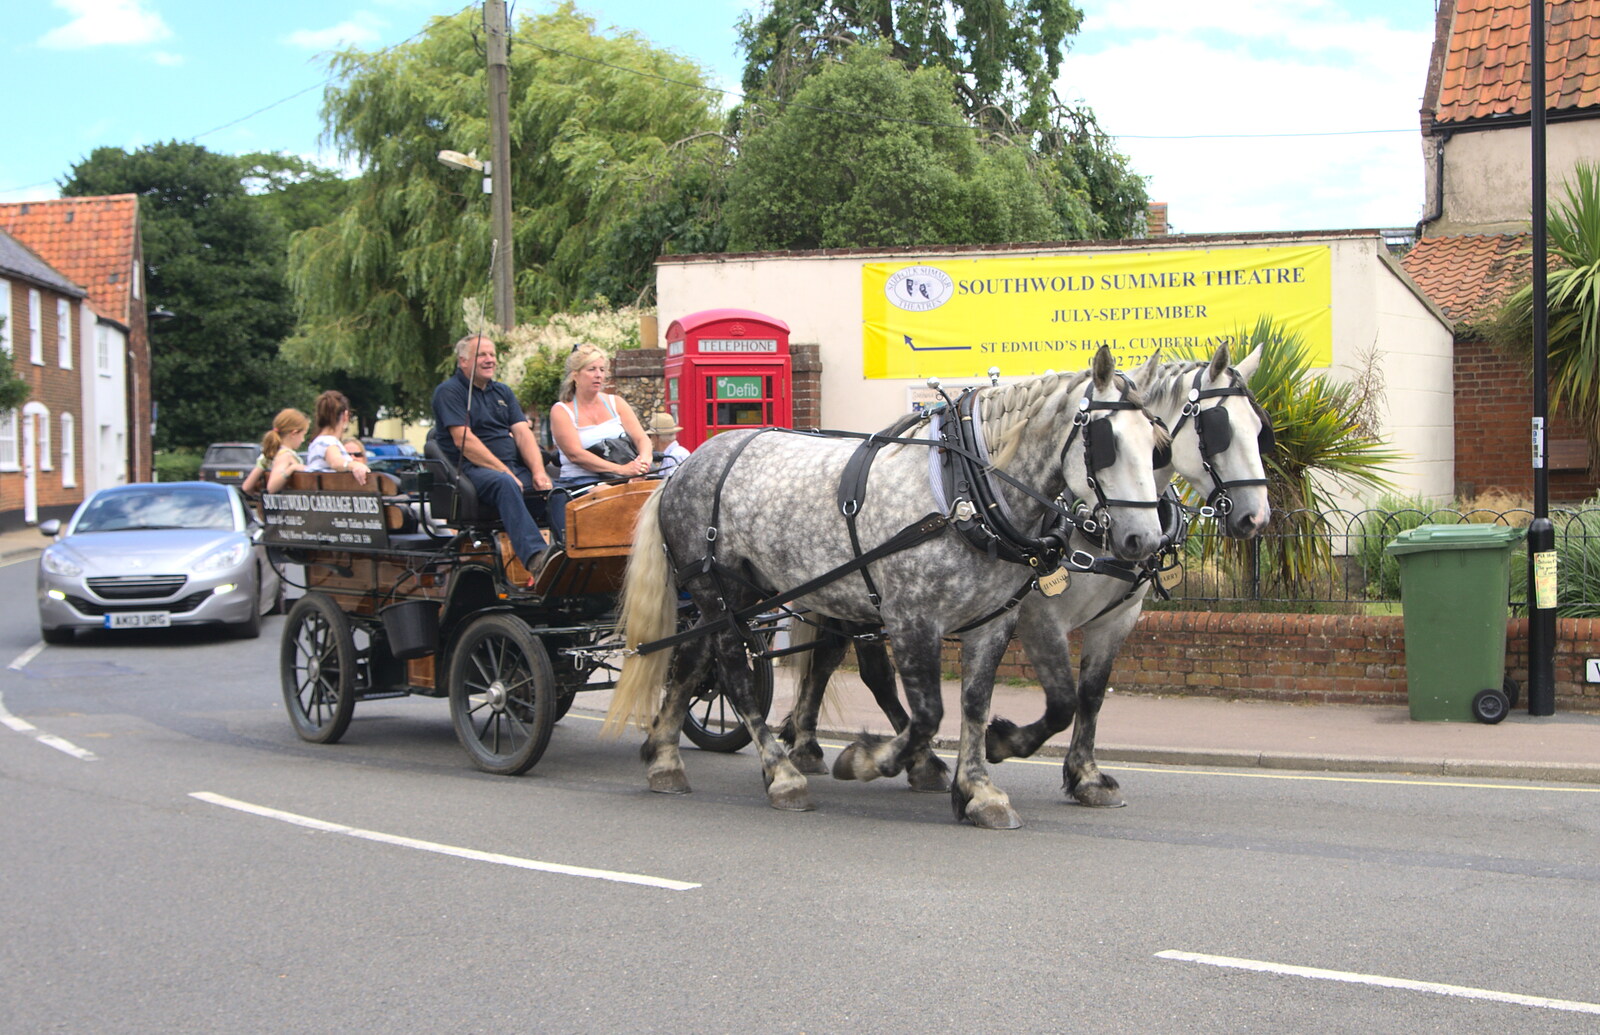 A touristey horse-and-cart rides around from The Danger of Trees: A Camping (Mis)adventure - Southwold, Suffolk - 3rd August 2015